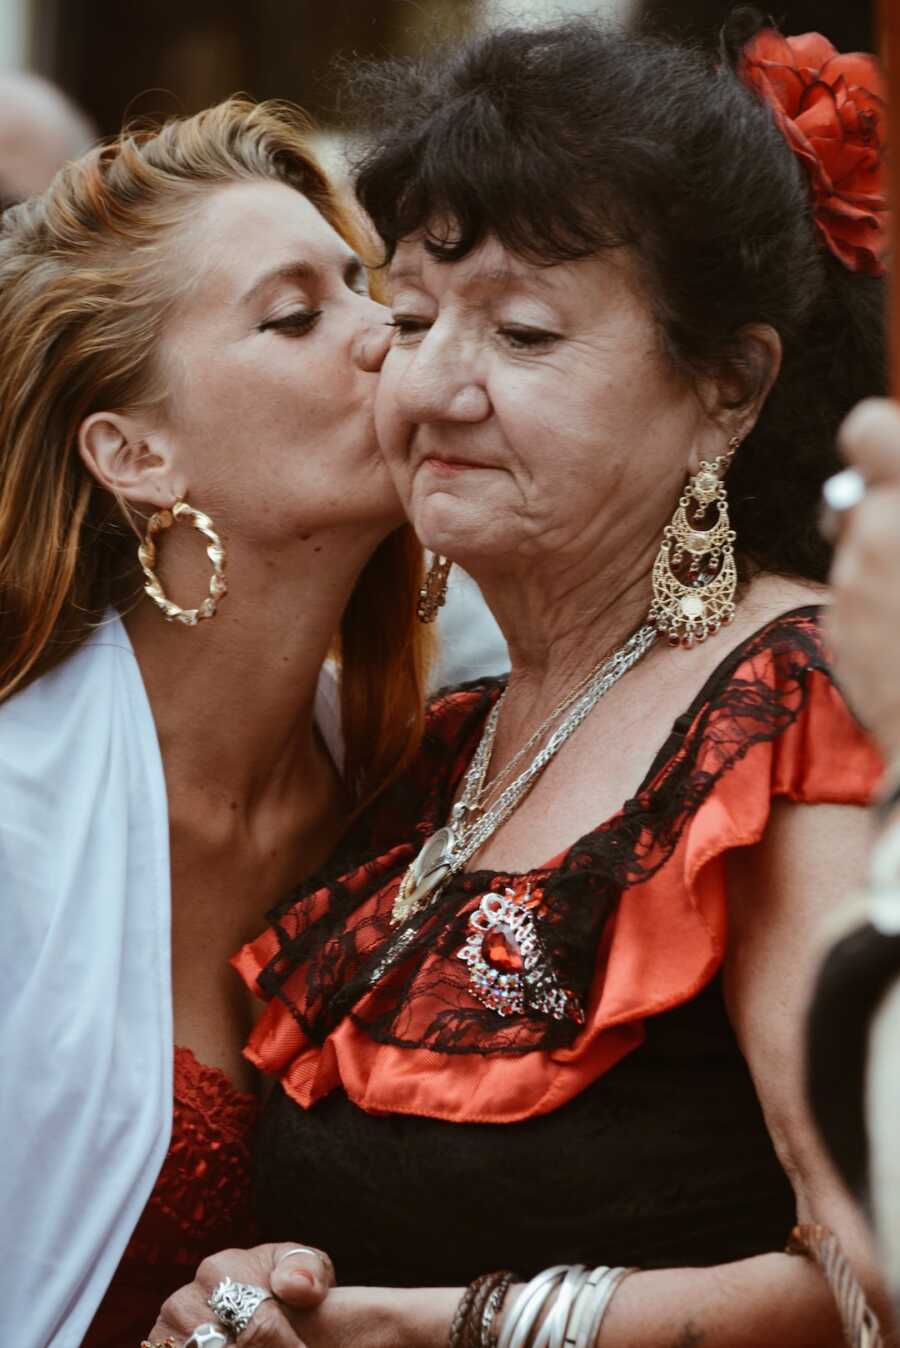 daughter gives her mother a kiss on the cheek